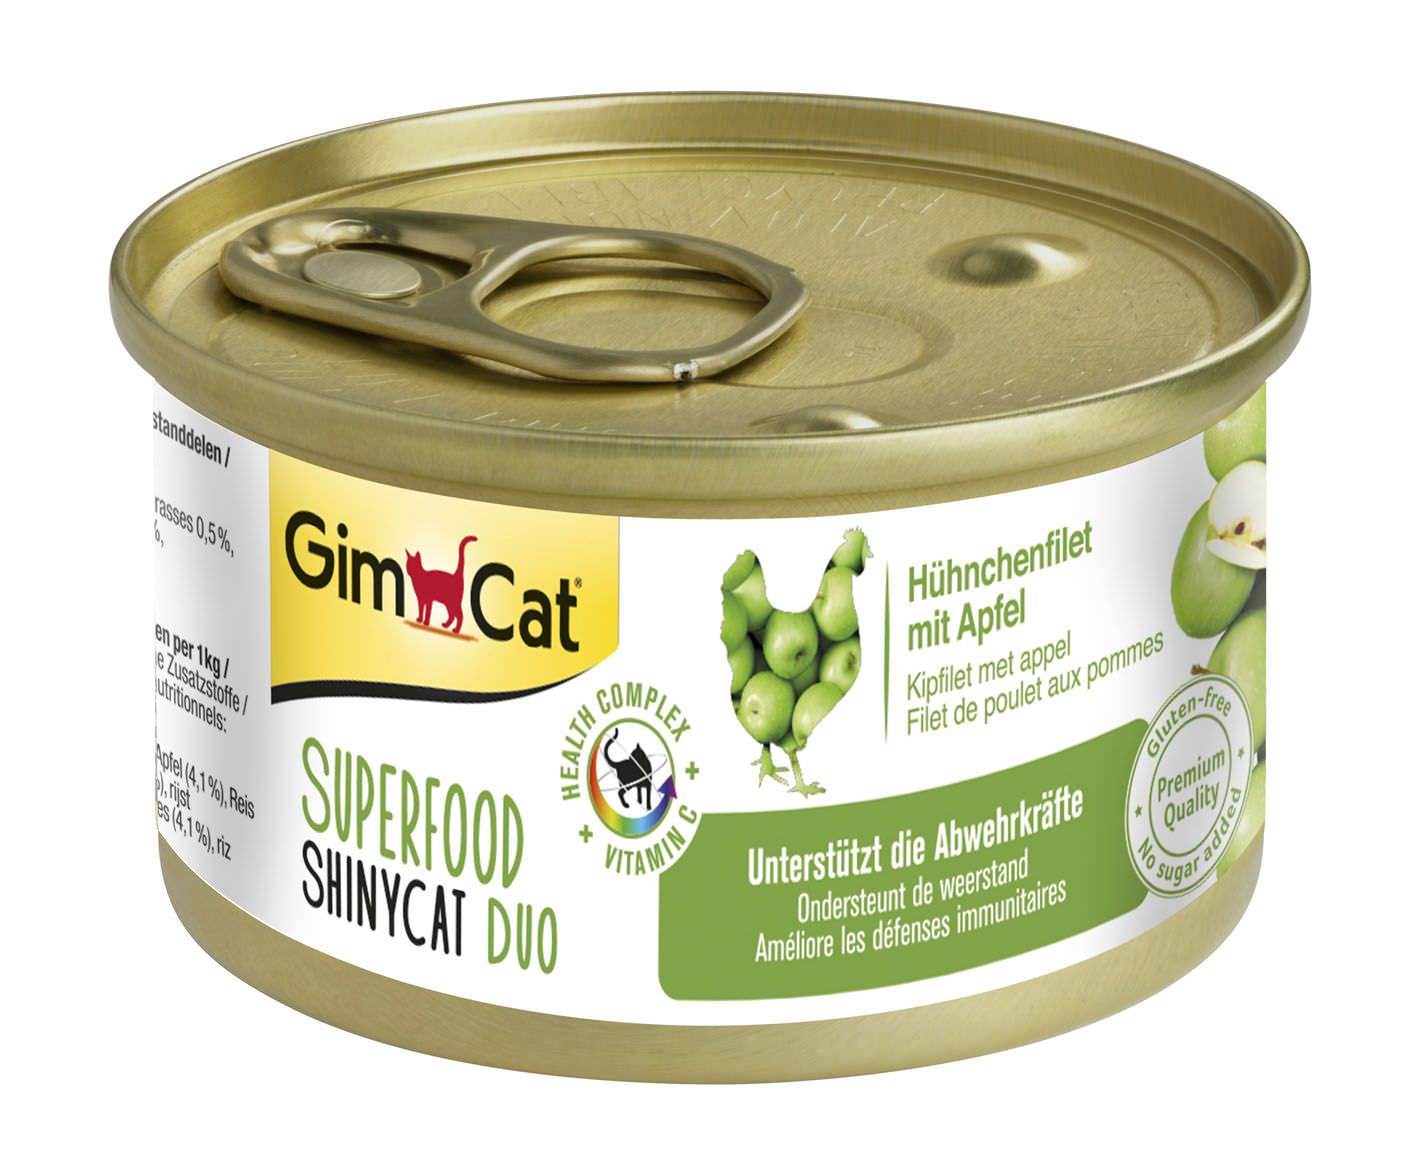 GimCat Superfood ShinyCat Duo Hühnchenfilet mit Apfel